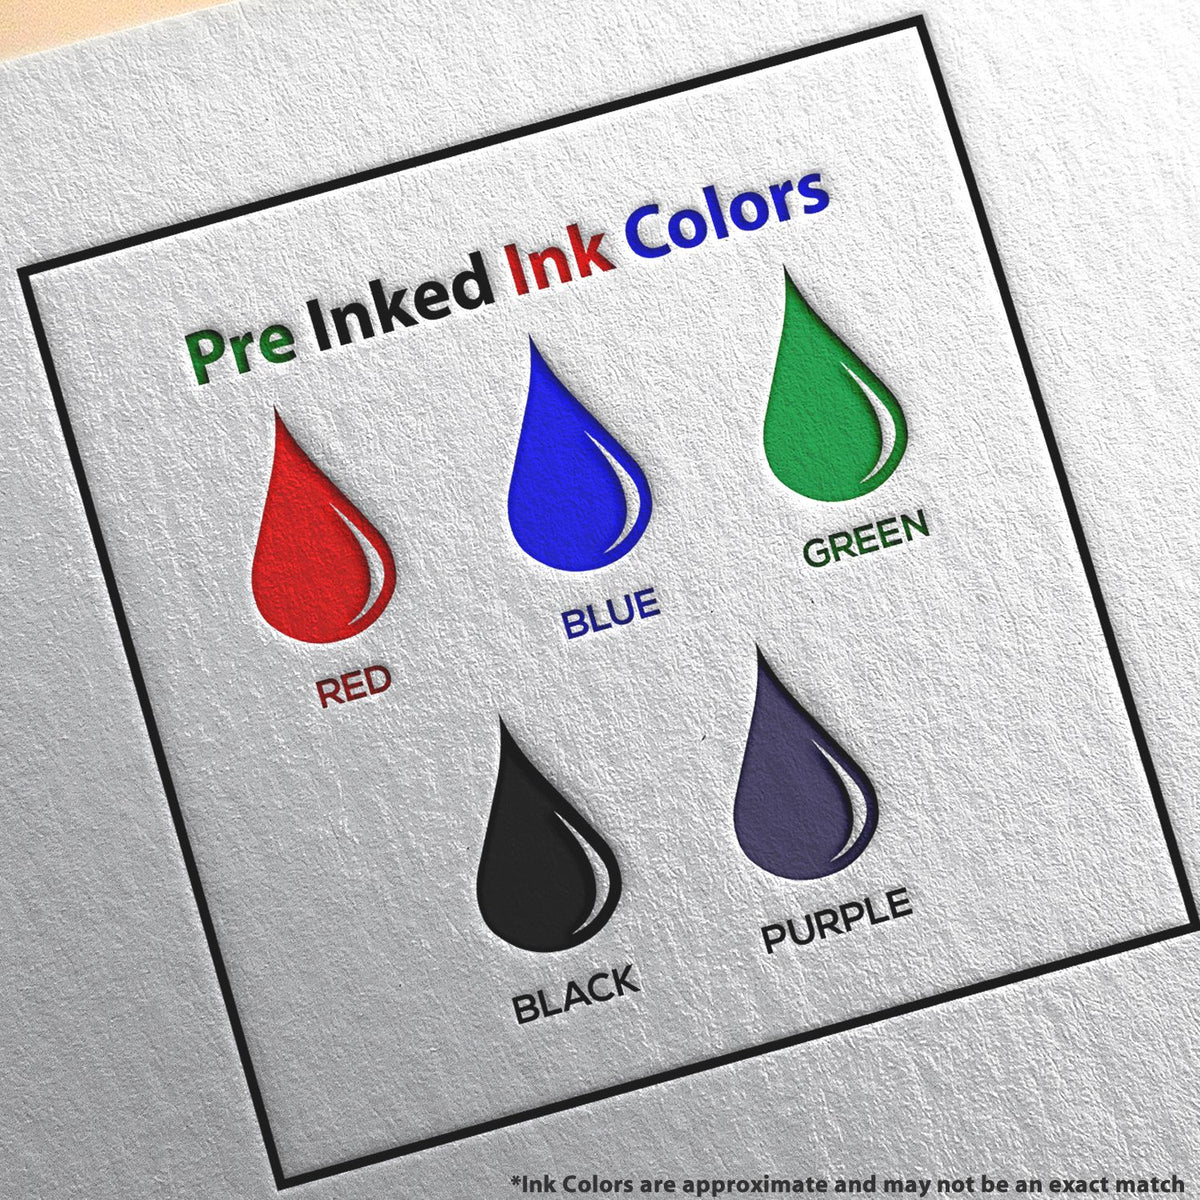 A picture showing the different ink colors or hues available for the PSI Missouri Notary Stamp product.